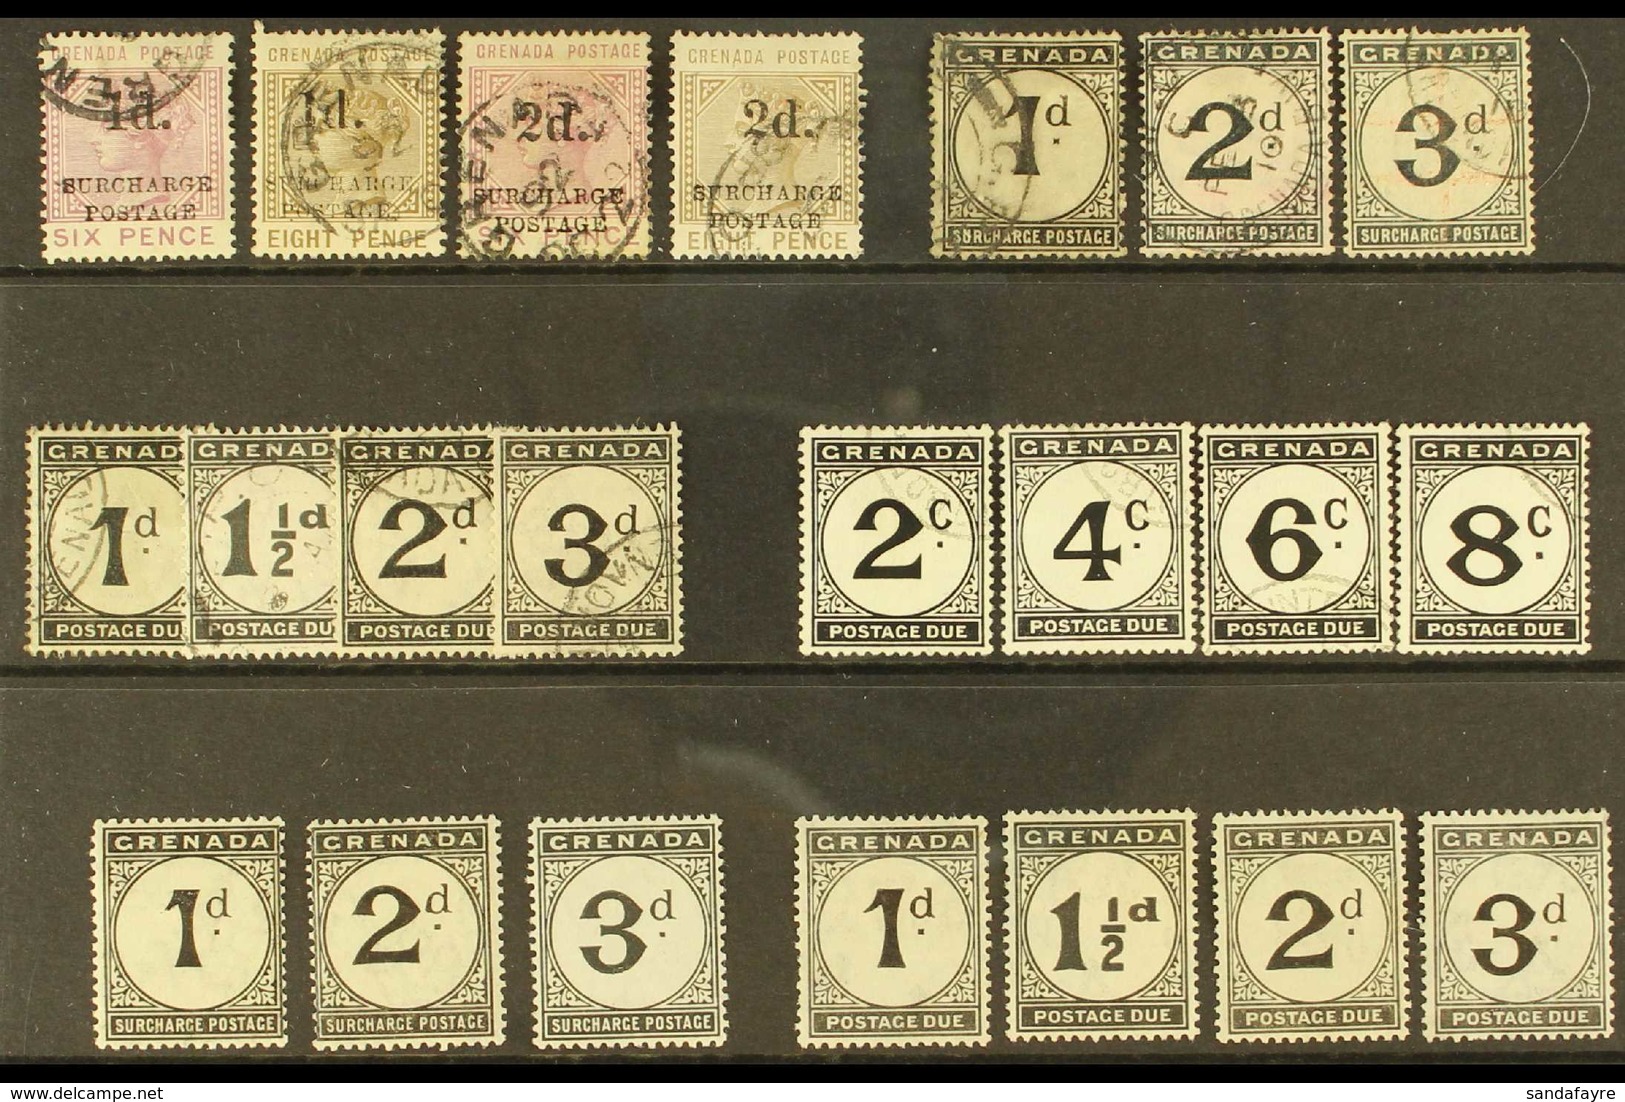 POSTAGE DUES 1892 - 1952 Mint And Used Collection With 1906 Set Mint, 1921 Set Mint, And 1892 Surcharges To 1952 (SG D4/ - Grenada (...-1974)